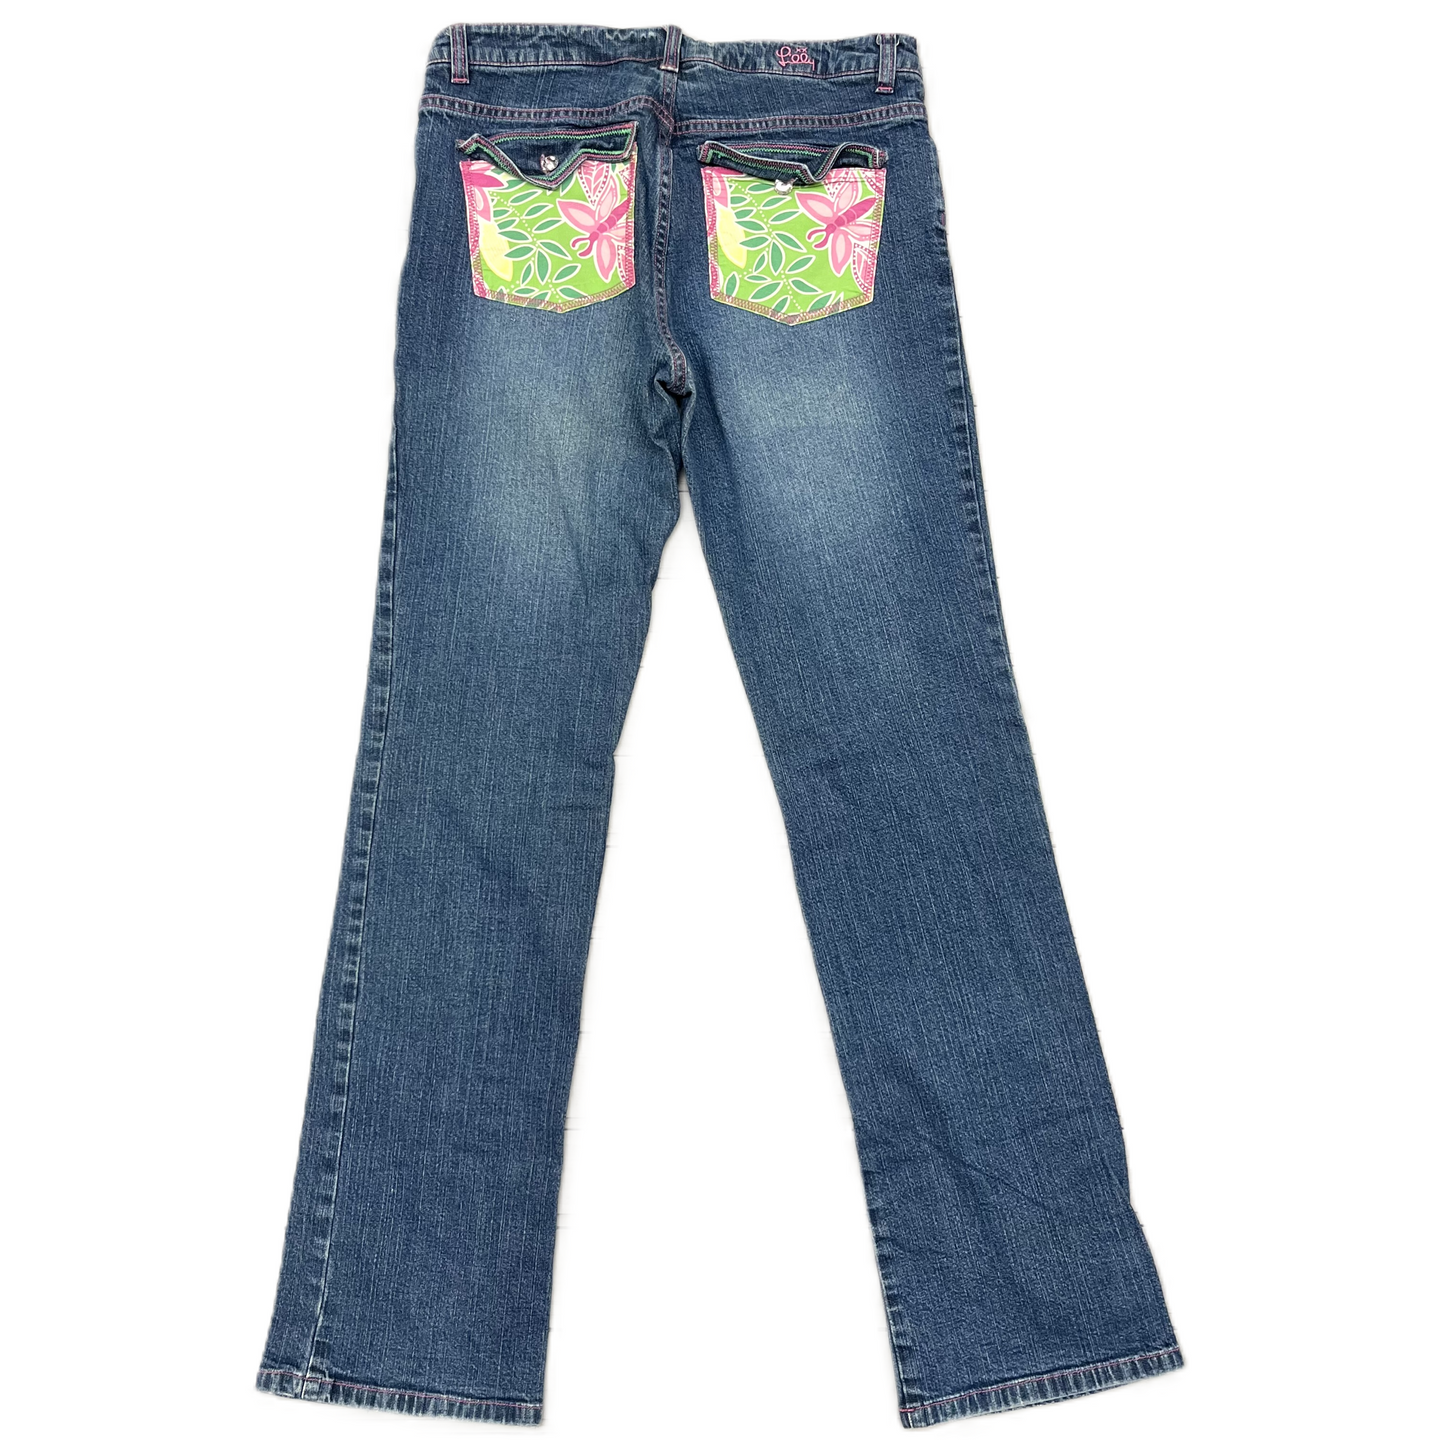 Jeans Designer By Lilly Pulitzer  Size: 6